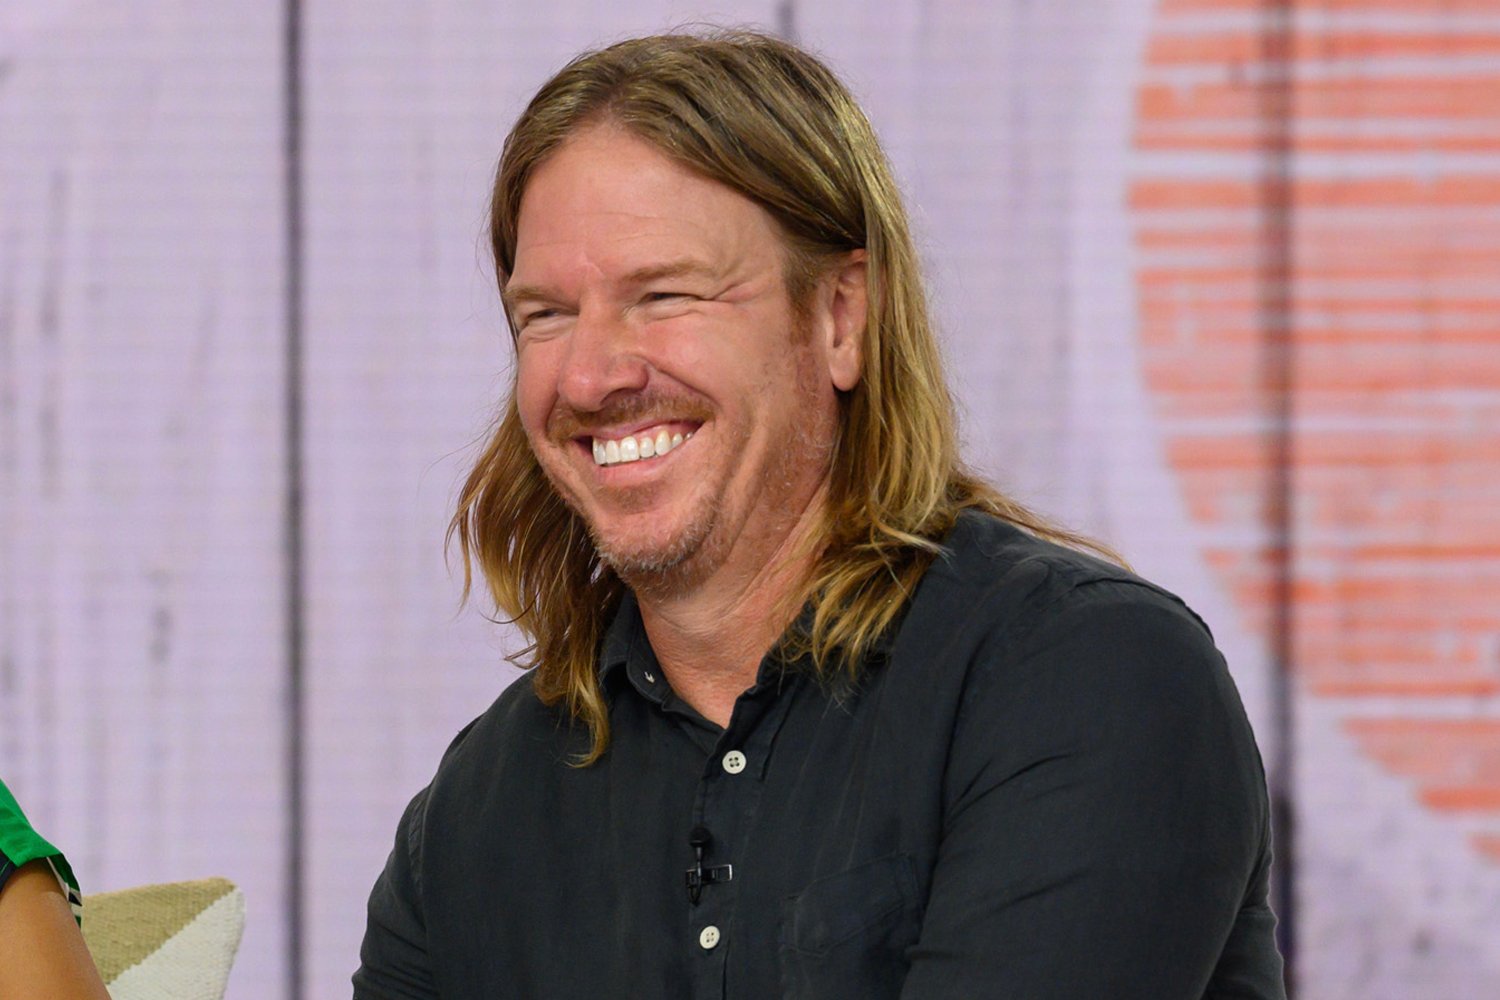 Chip Gaines smiling, long hair, and a button up navy shirt